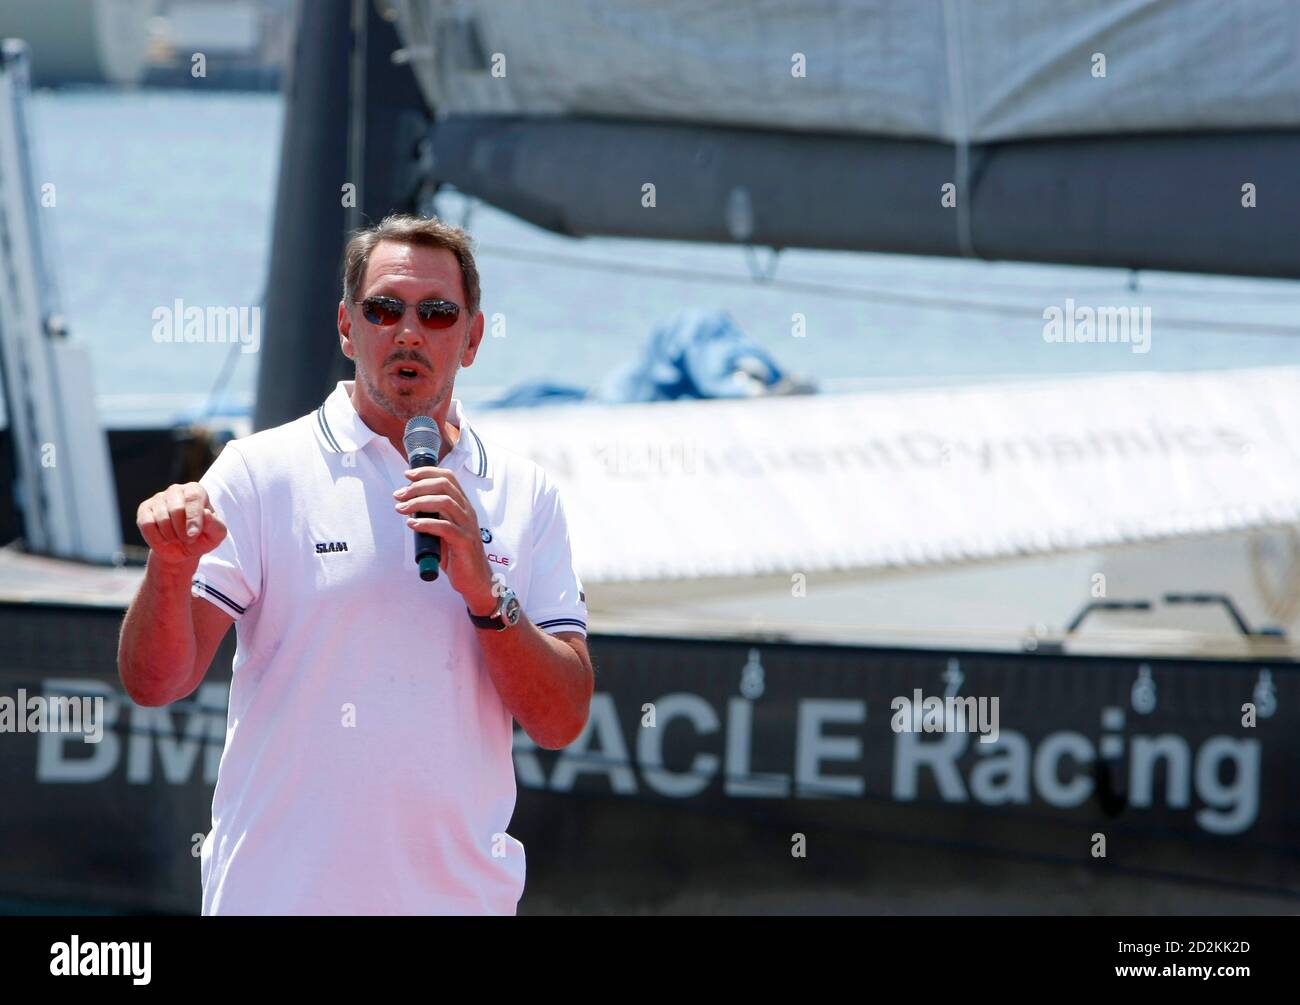 Oracle Corp co-founder and CEO Larry Ellison makes the announcement that  the BMW Oracle team will be racing its BOR 90 trimaran nicknamed  "Dogzilla", during a news conference in San Diego, California